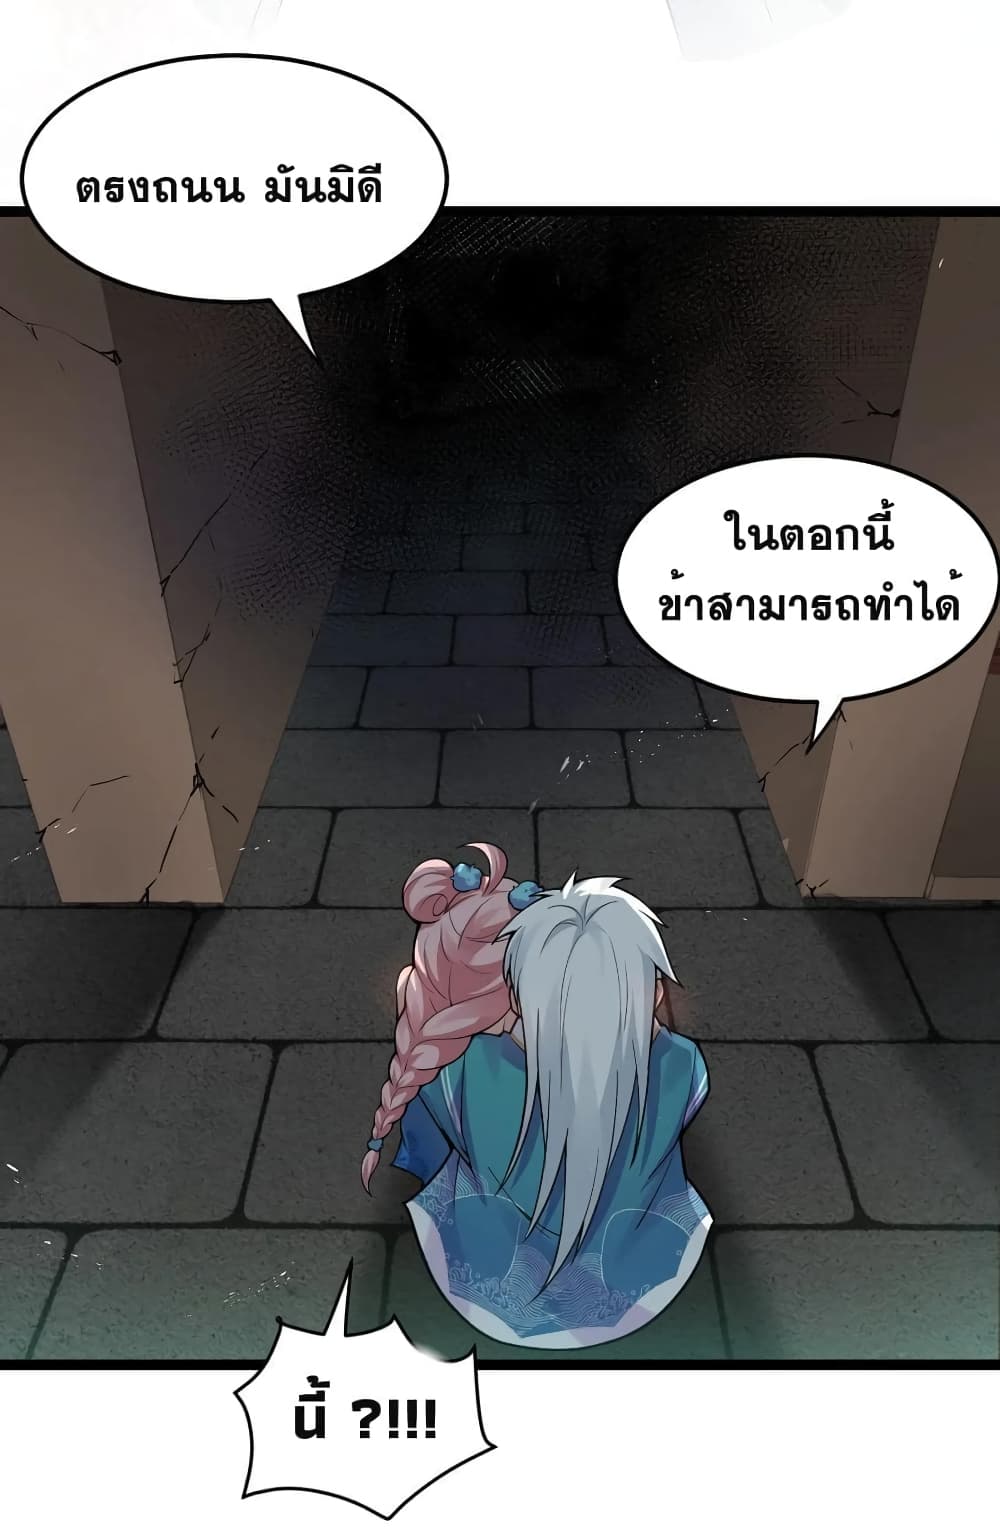 Godsian Masian from Another World ตอนที่ 106 (5)